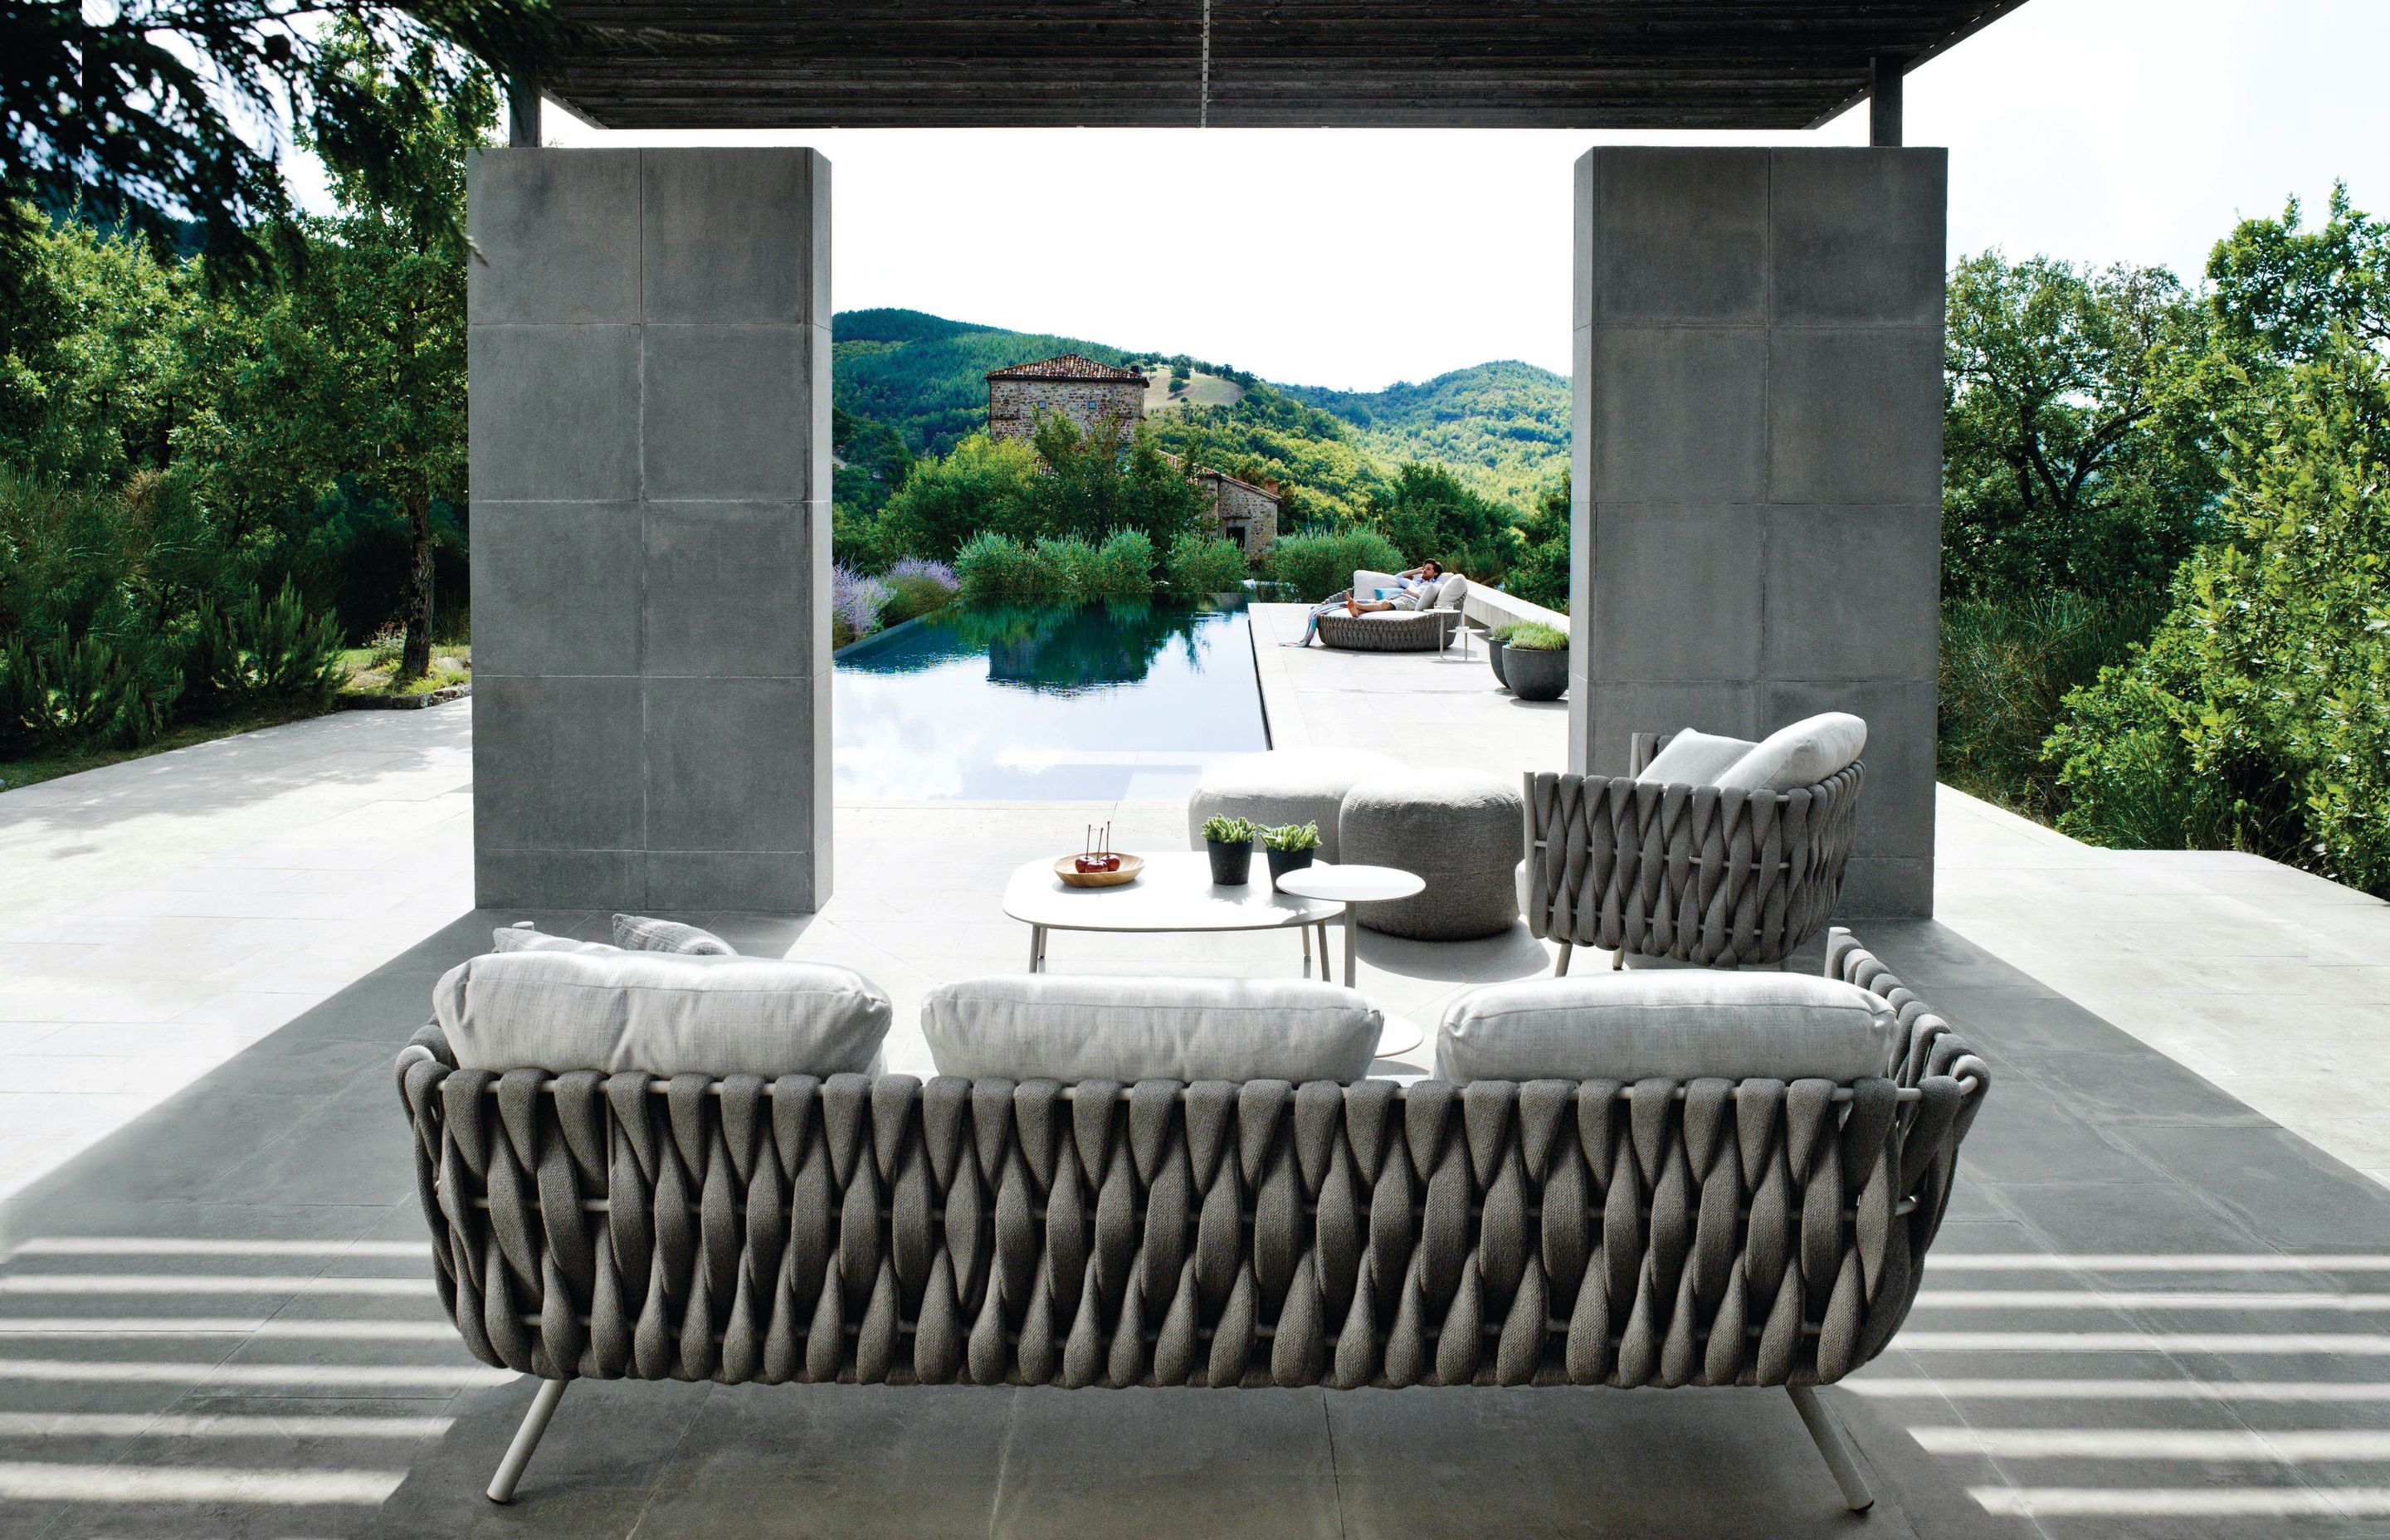 Tosca sofa by Monica Armani for Tribù, available from Dawson &amp; Co.